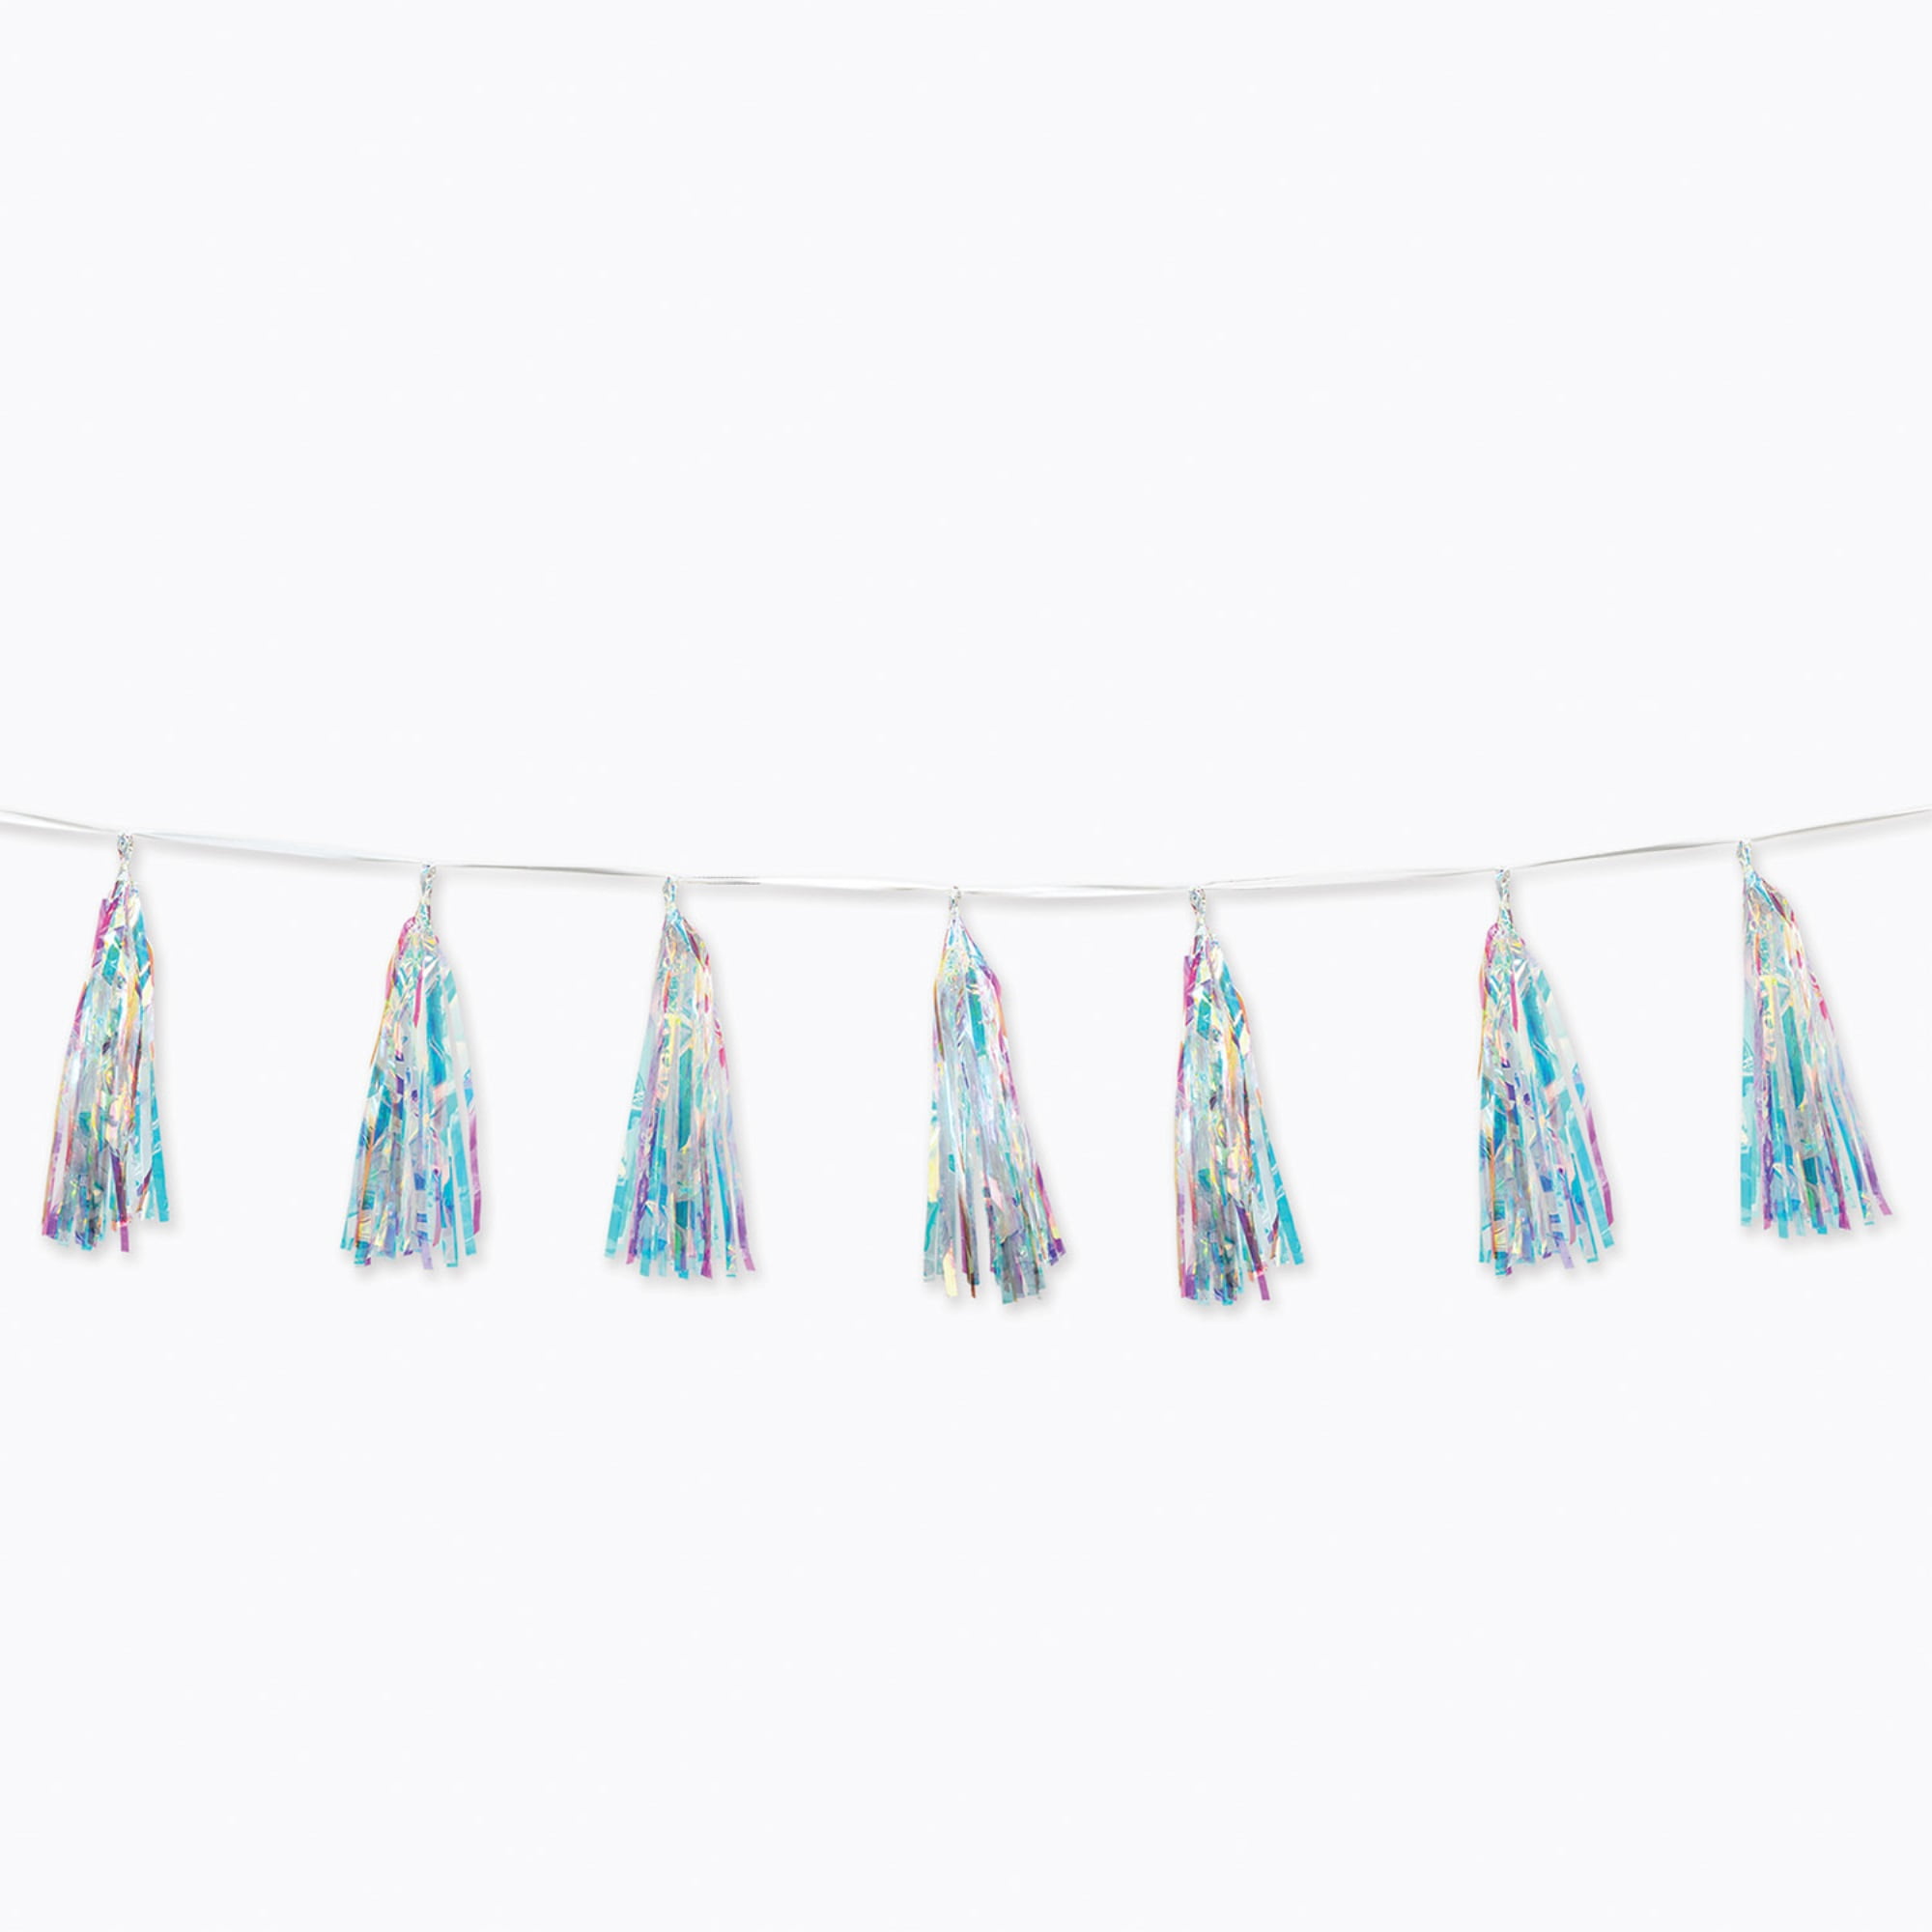 Picture of Beistle 53417 13.5 in. x 8 ft. Iridescent Tassel Garland - Pack of 6